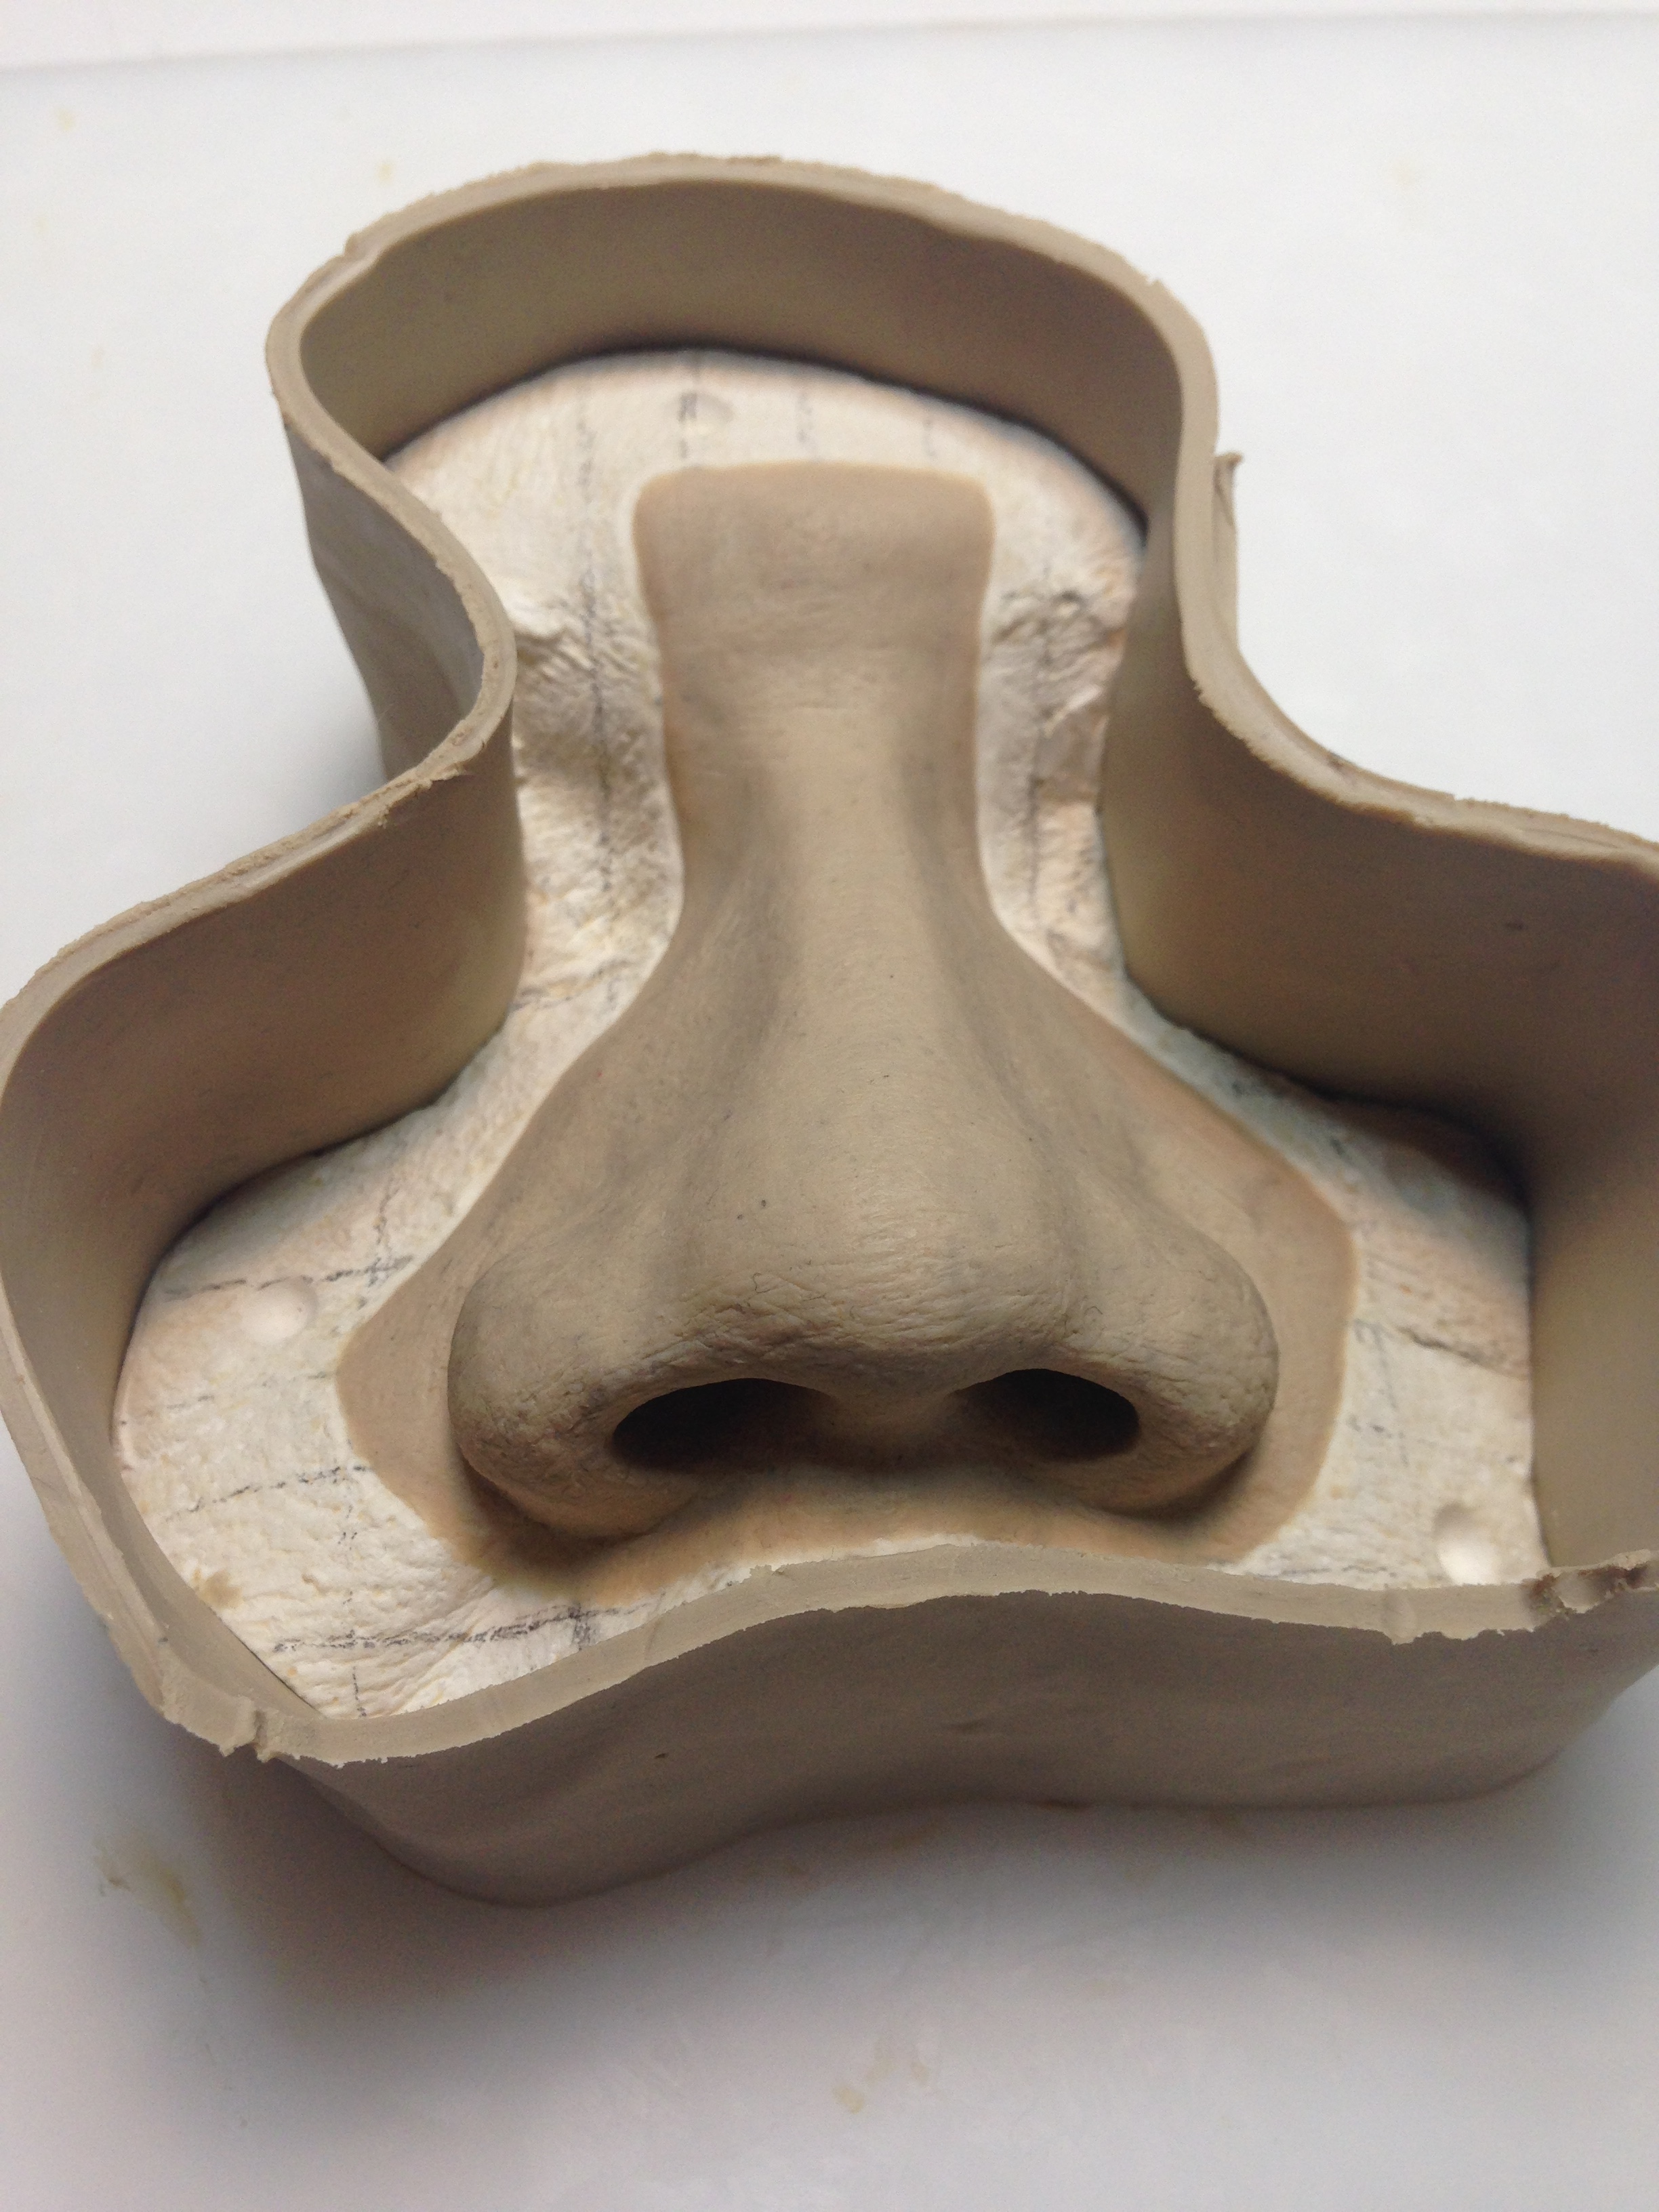 Nose Prosthesis Clay Modeling